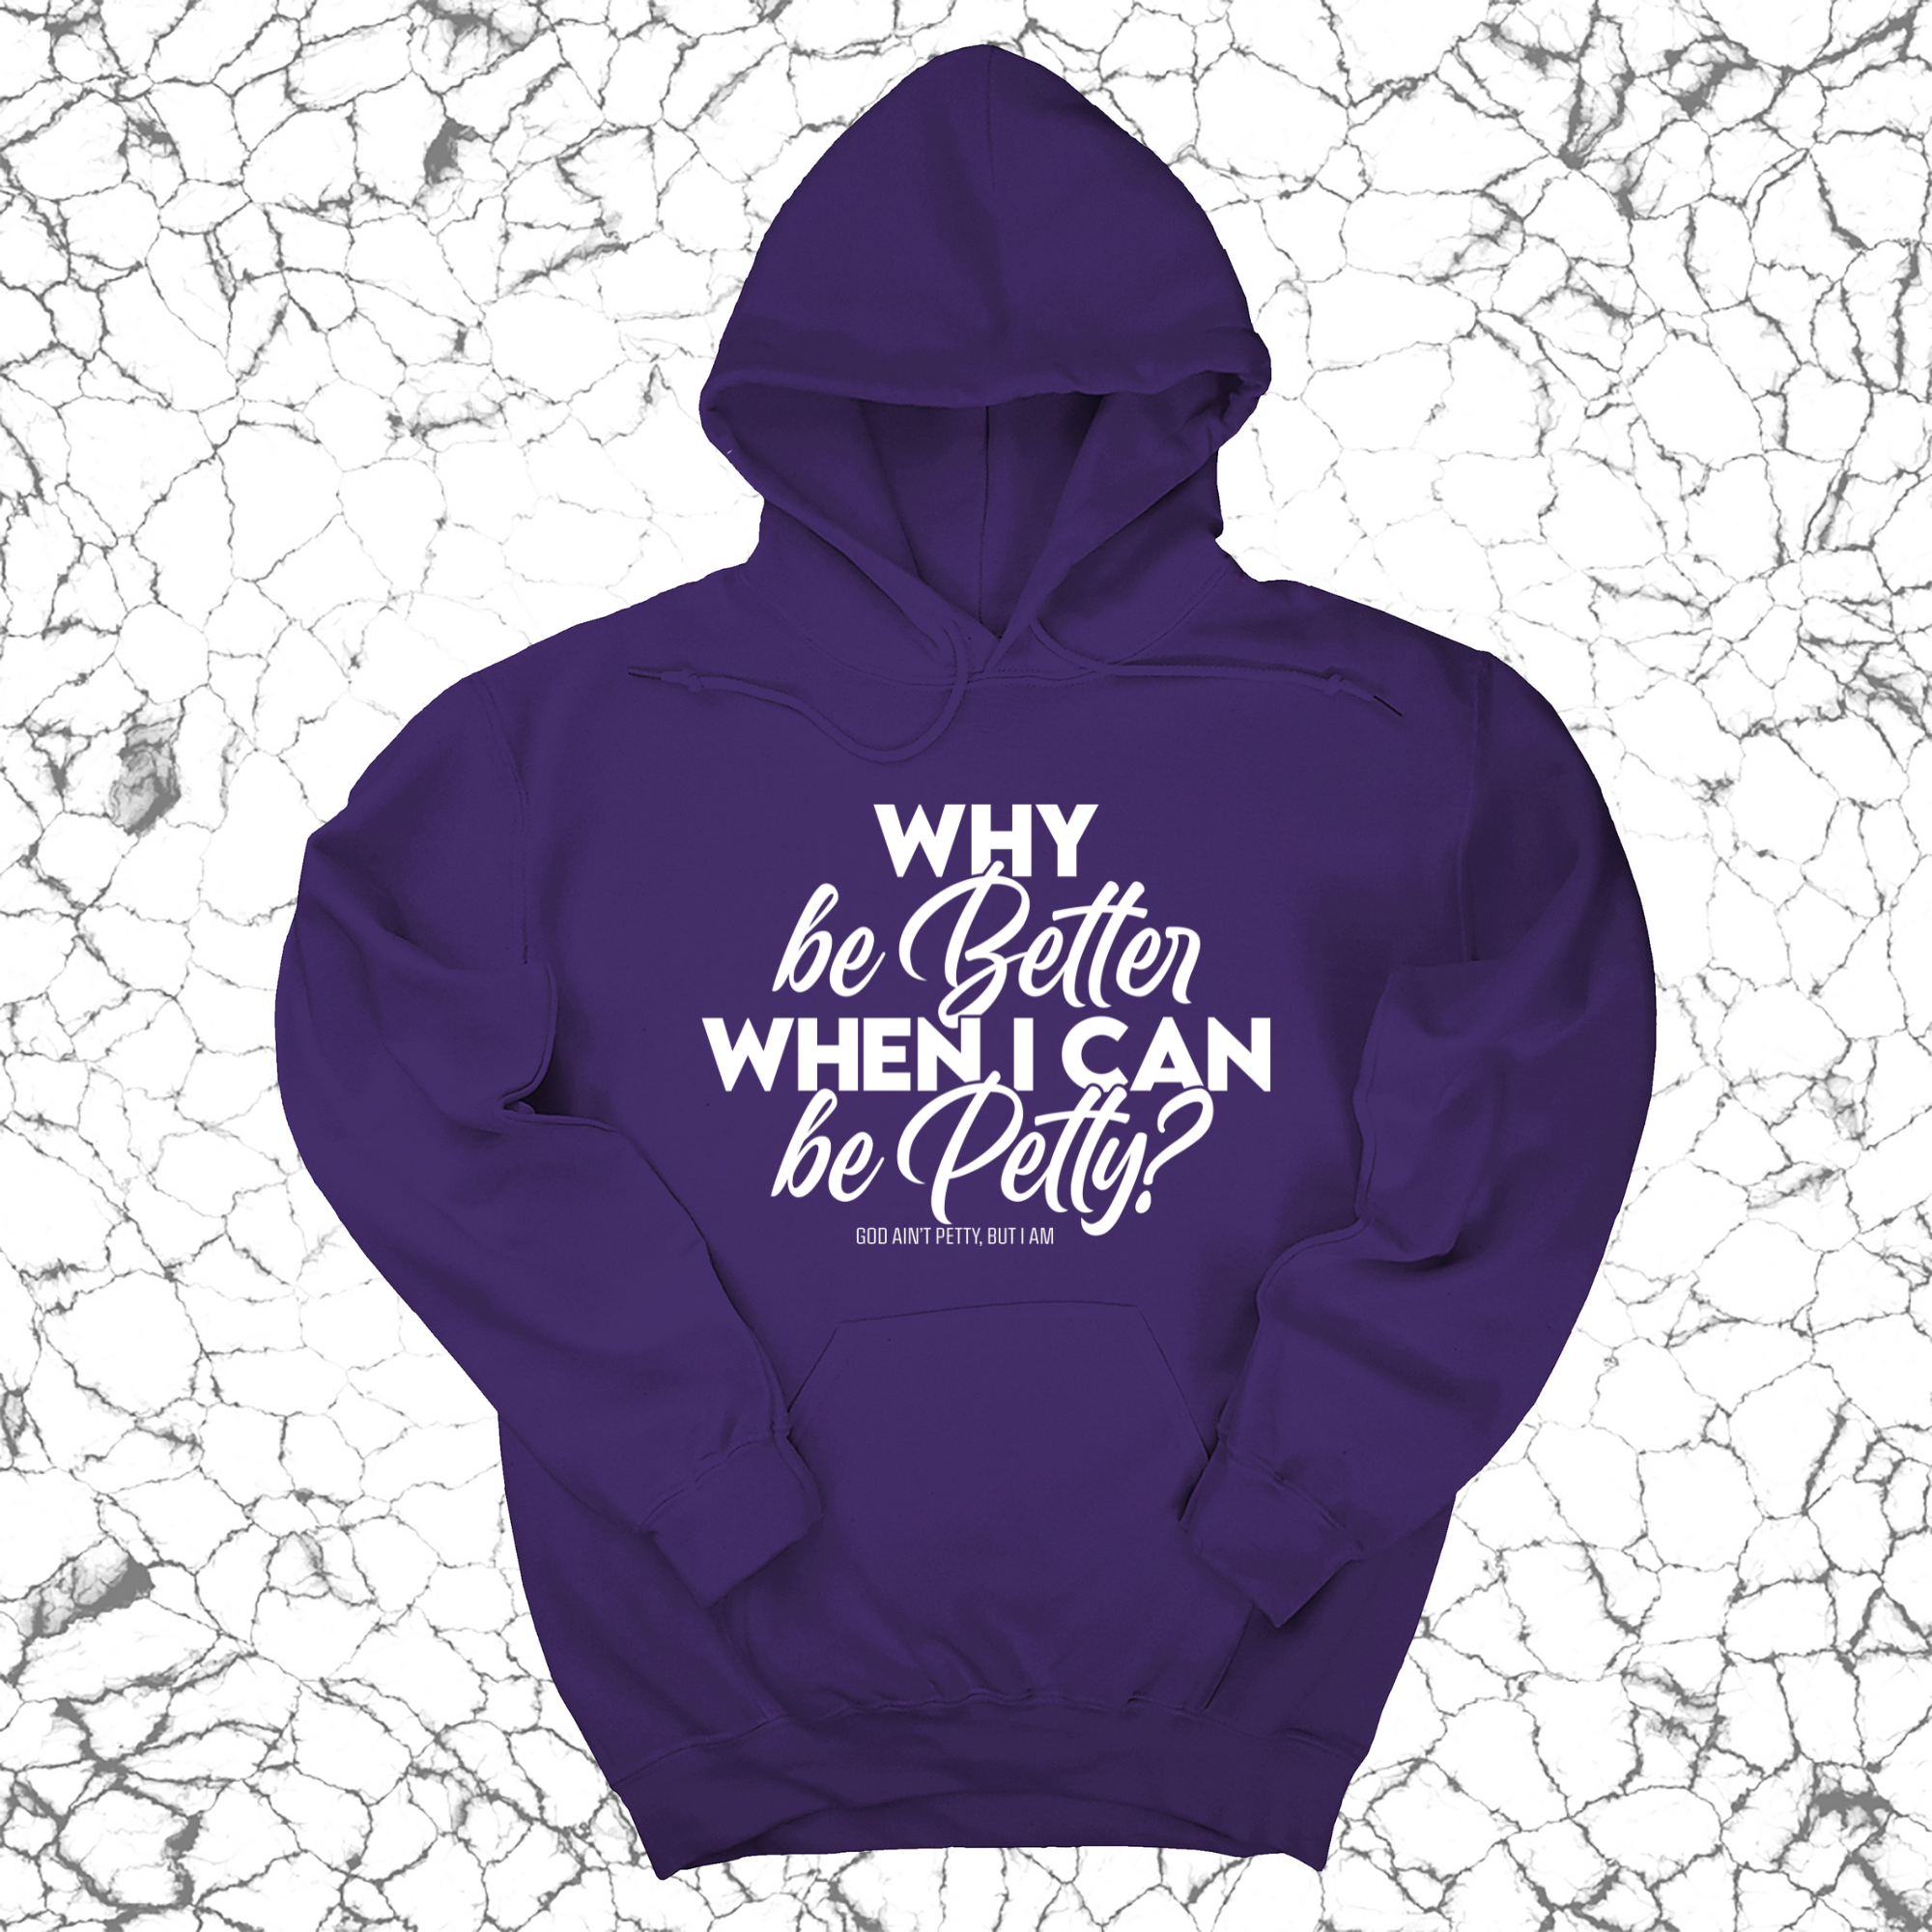 Why be better when I can be petty Unisex Hoodie-Hoodie-The Original God Ain't Petty But I Am